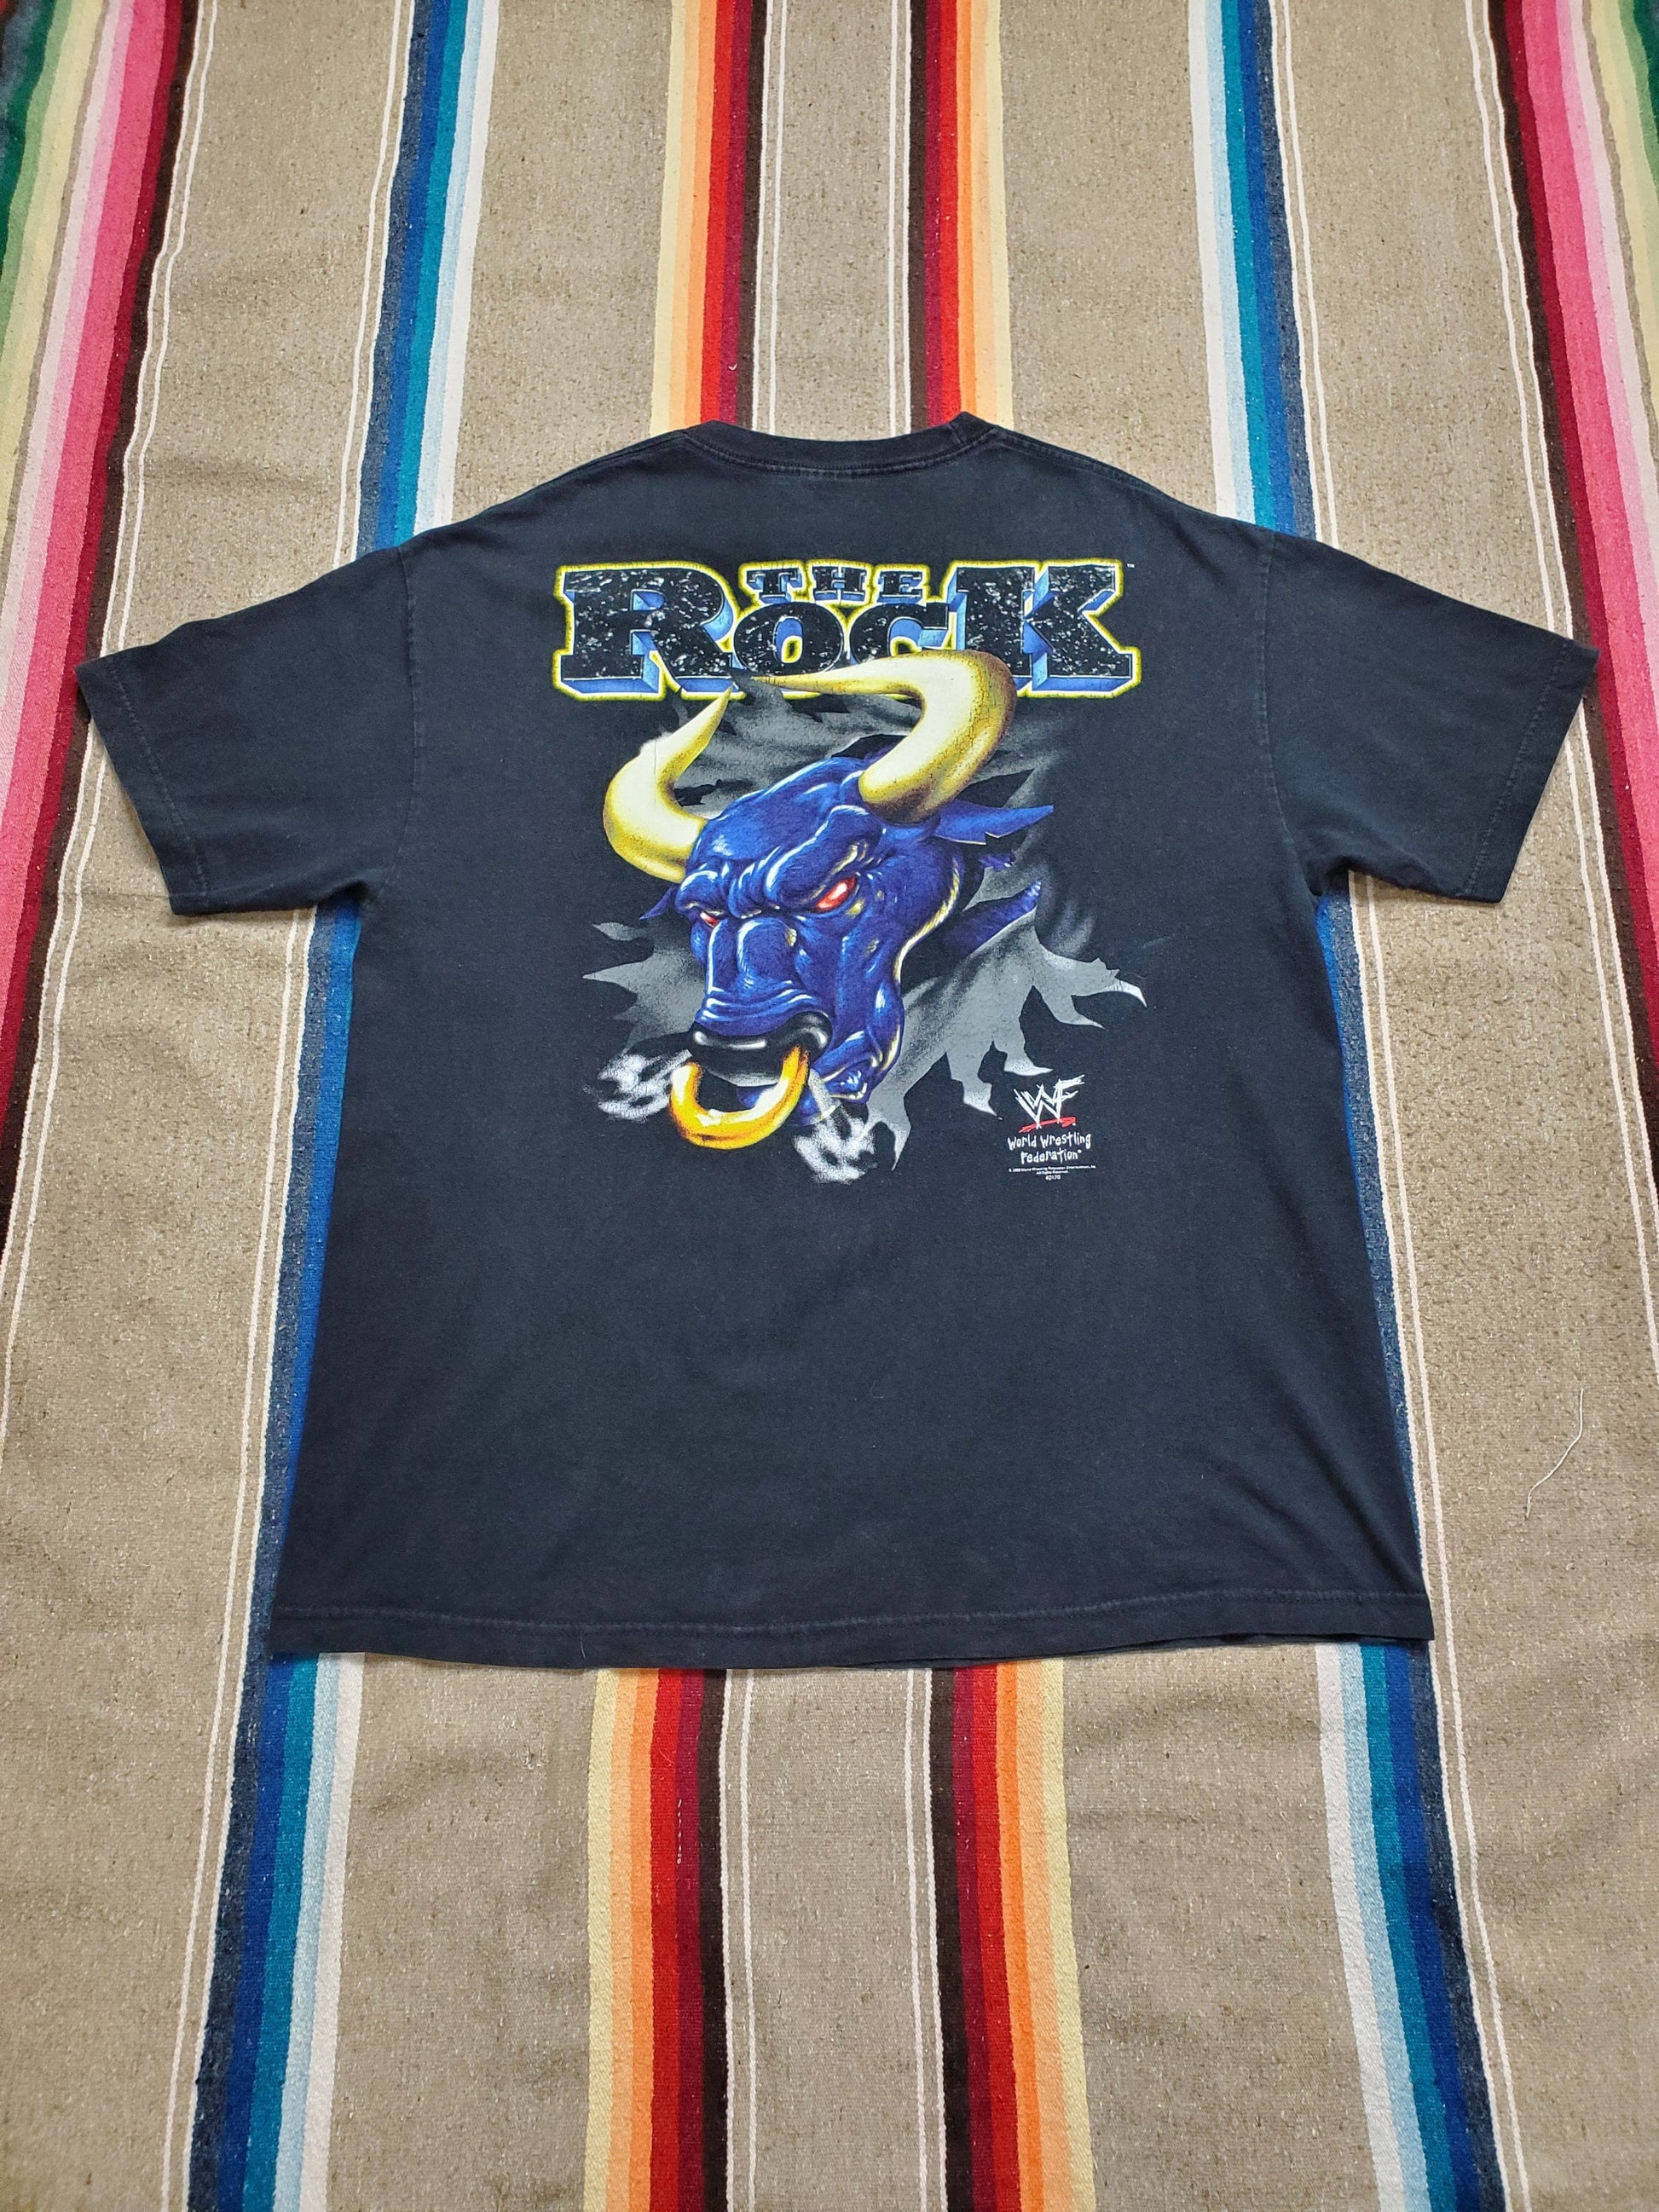 2000s 2000 WWF The Rock Wrestling T-Shirt Size XL